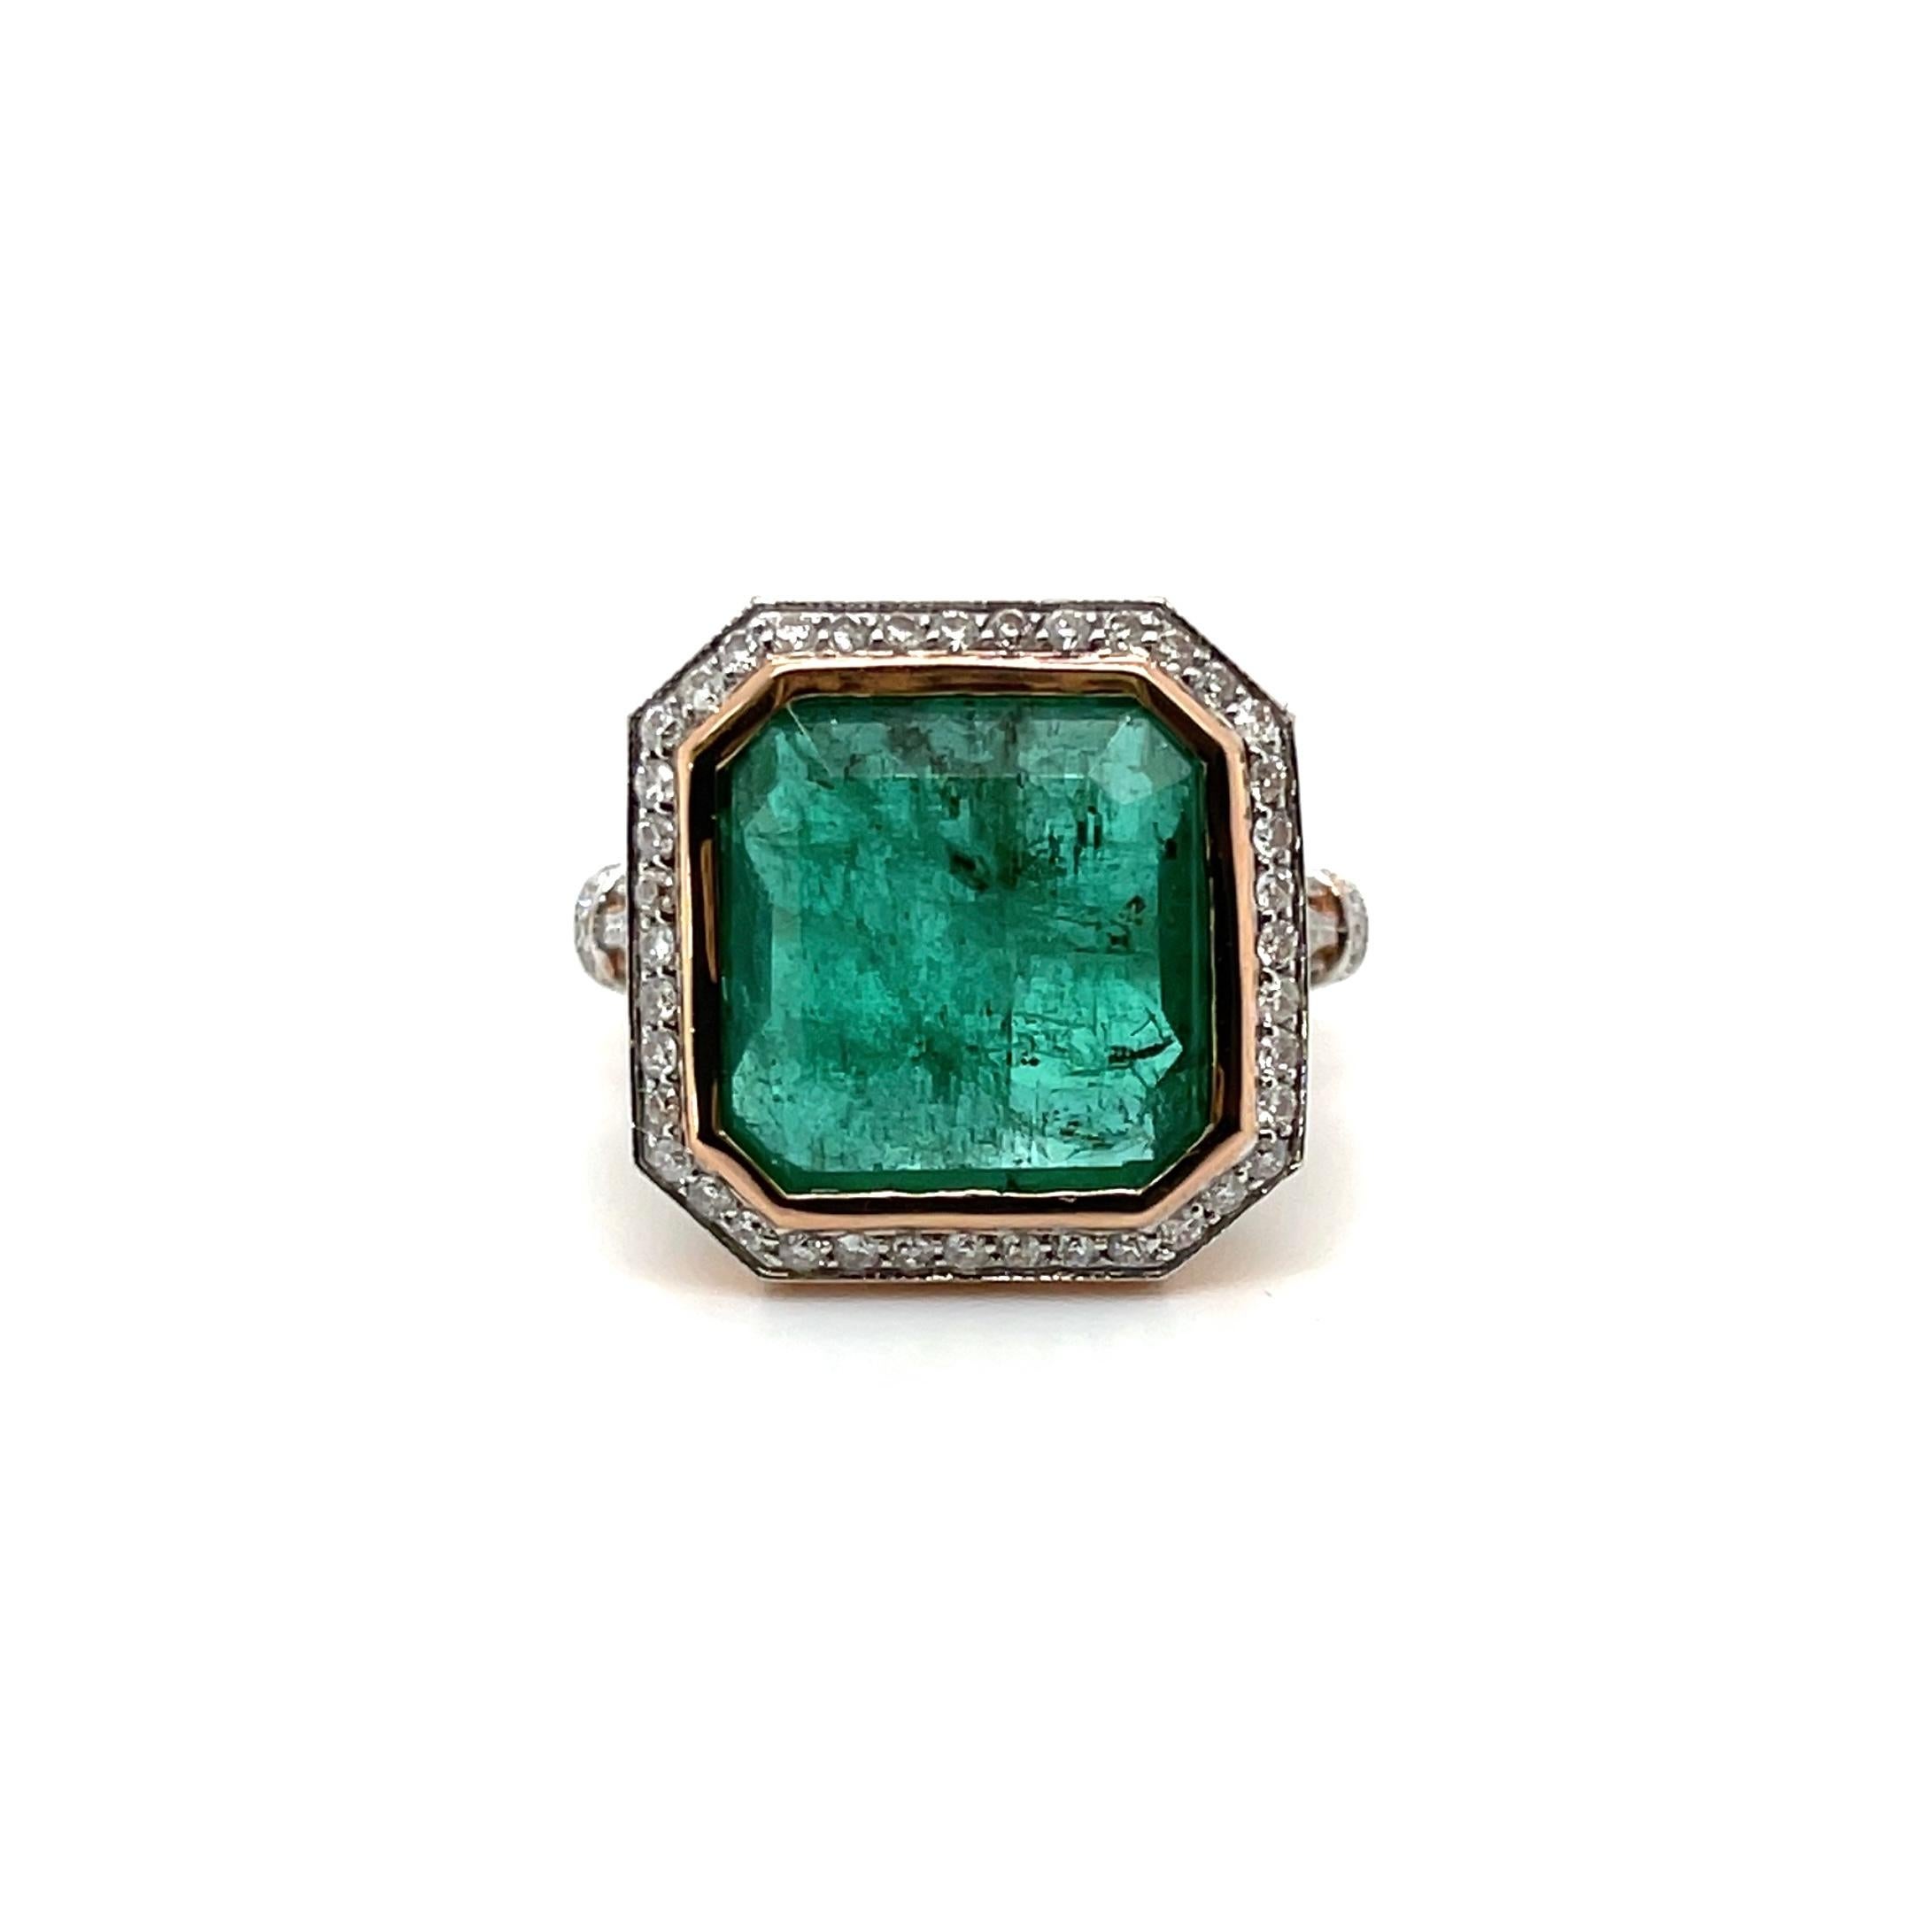 Gorgeously Designed ring , featuring A gorgeous Emerald and a stunning selection of diamonds, gorgeously crafted in fourteen karat rose gold.

Item 1
One ladies - 14ct rose gold dress ring, narrow, low half round shank with underrail bezel,
polished